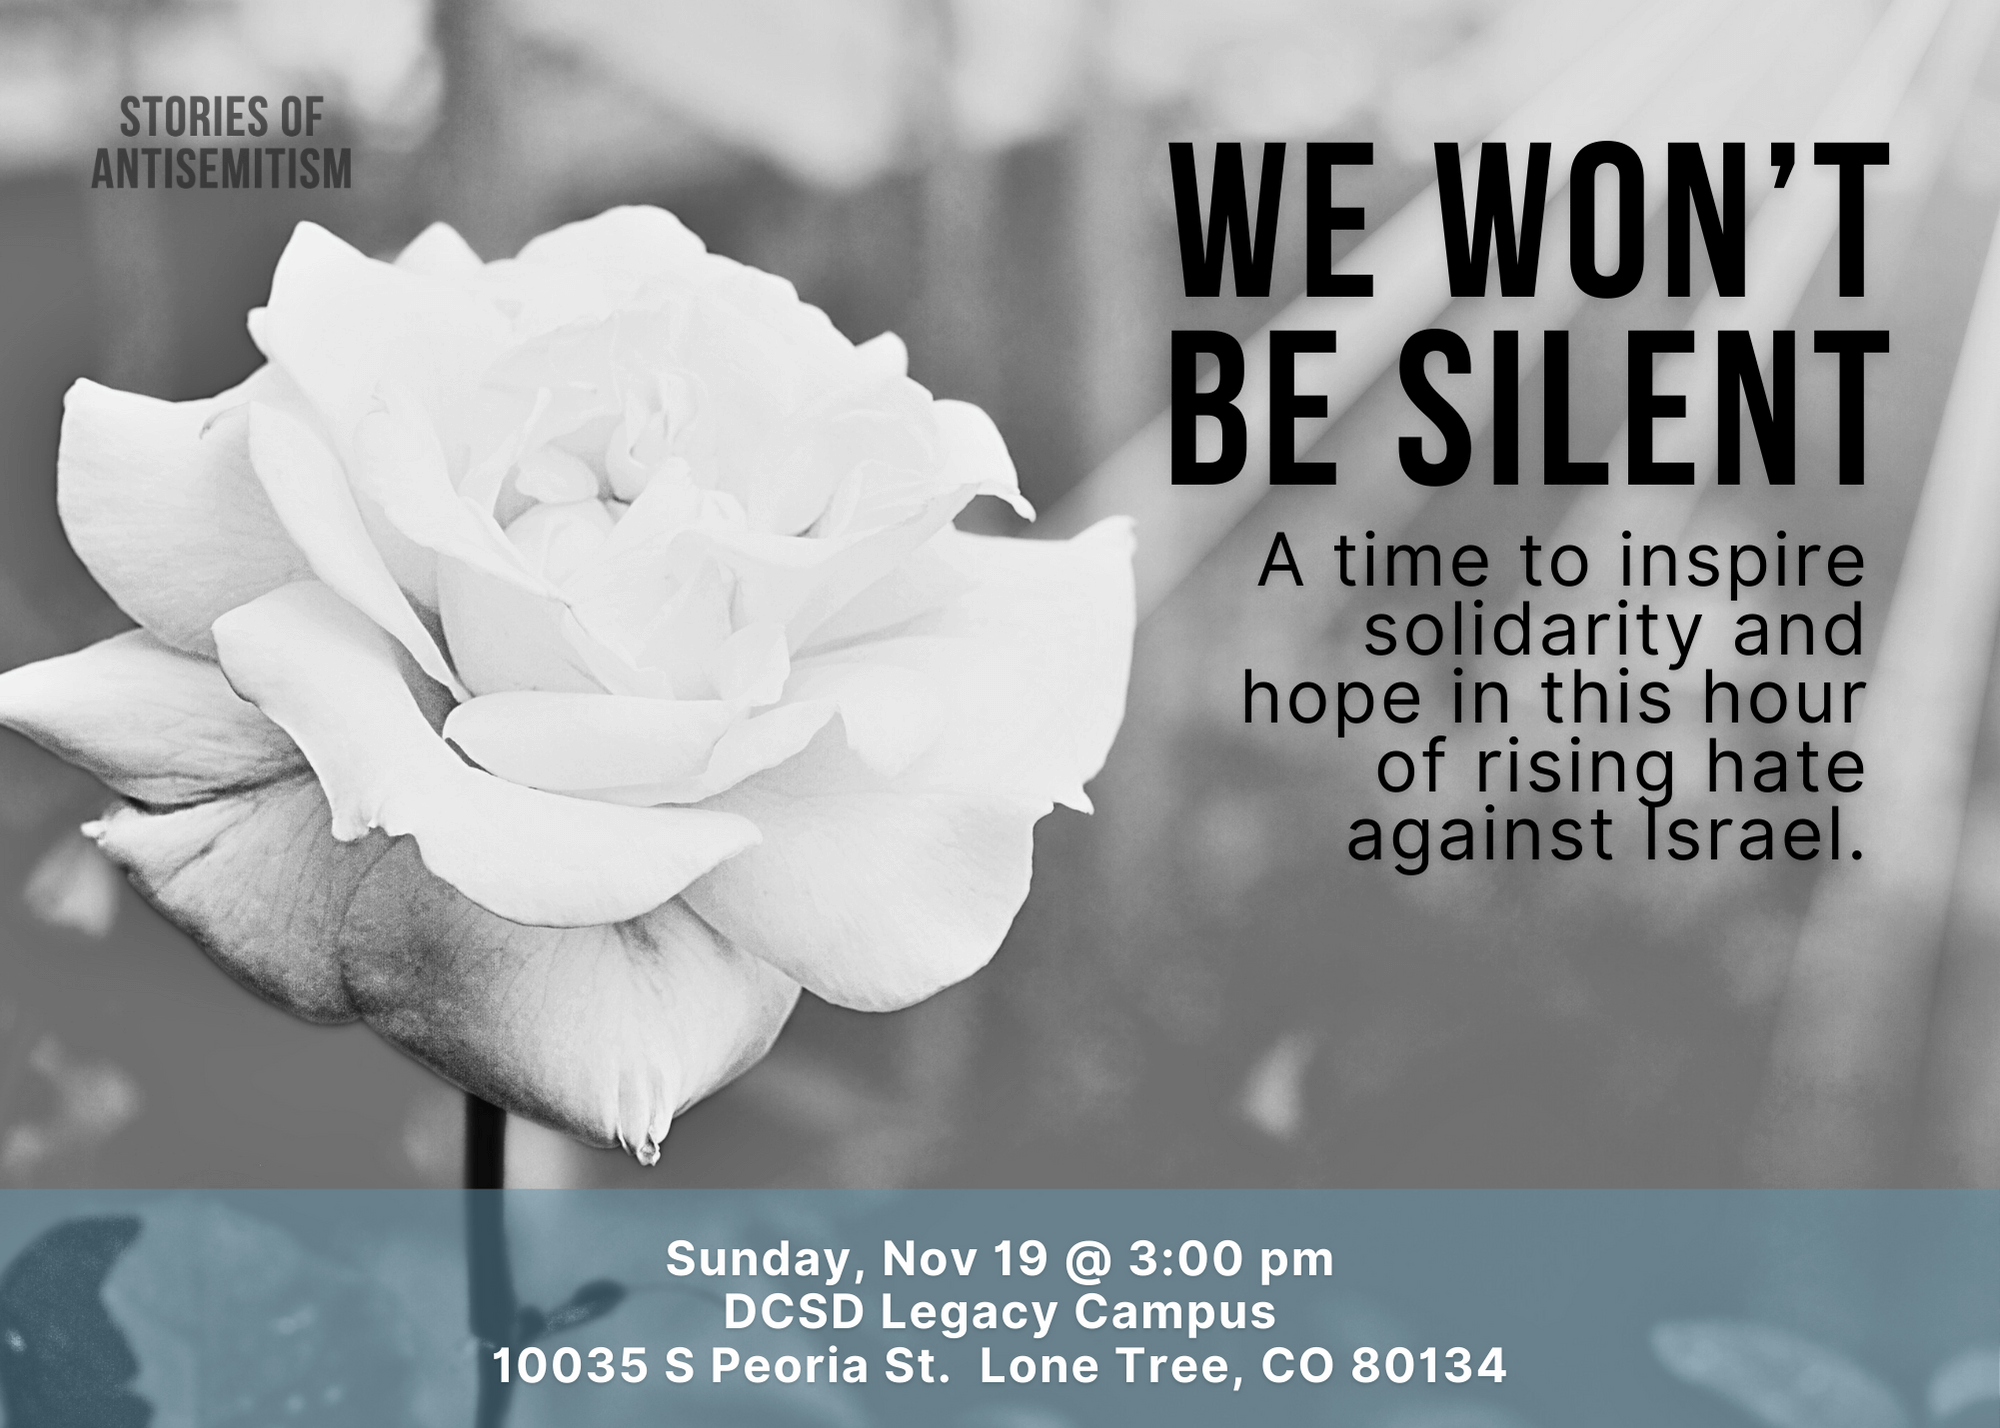 We wont be silent event